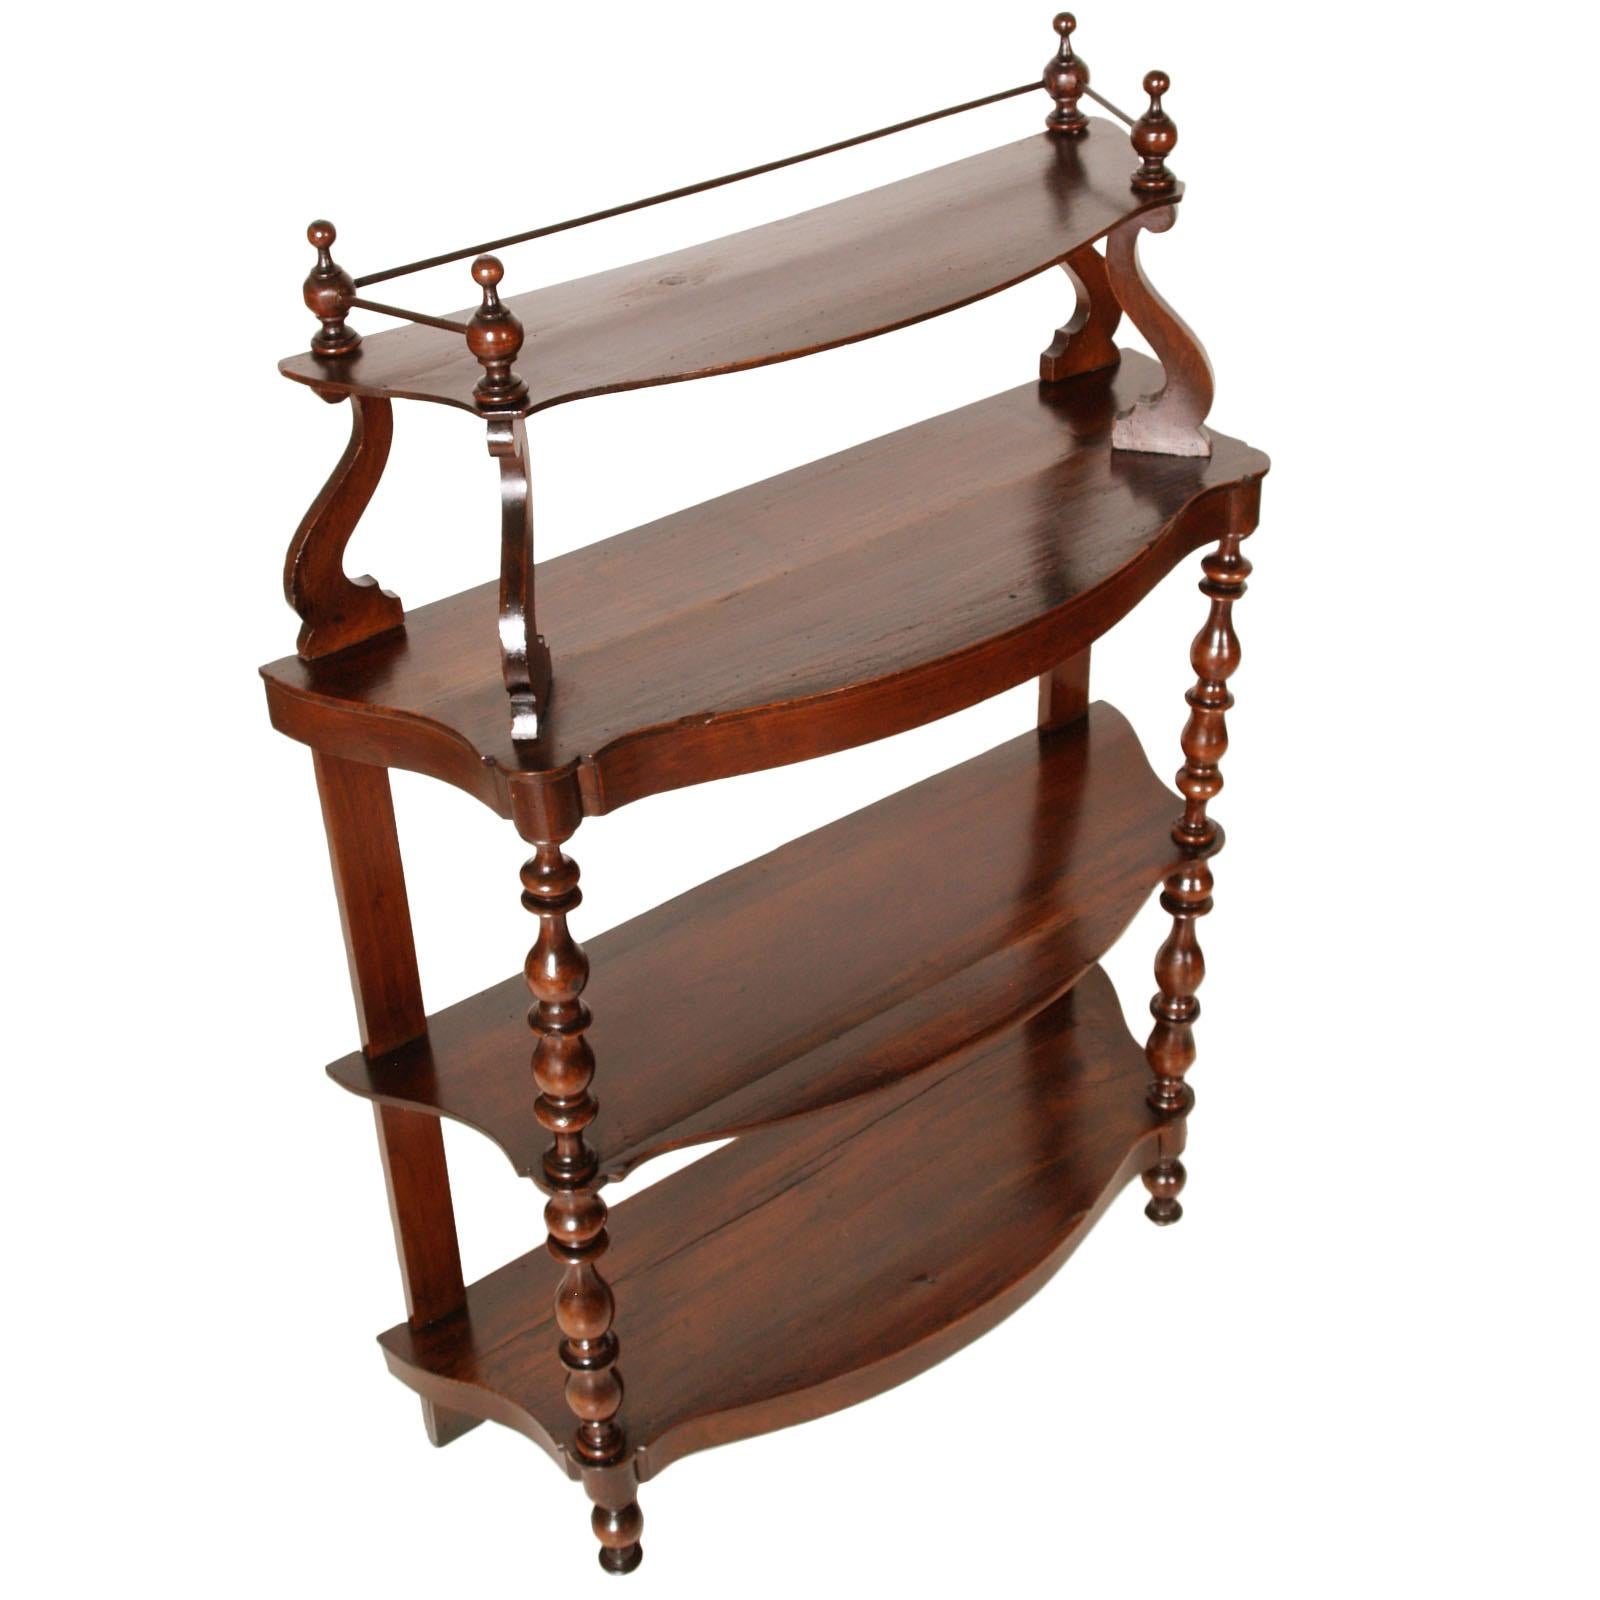 18th Century Venetian Baroque Étagère, Massive Walnut Restored and Wax Polished For Sale 1